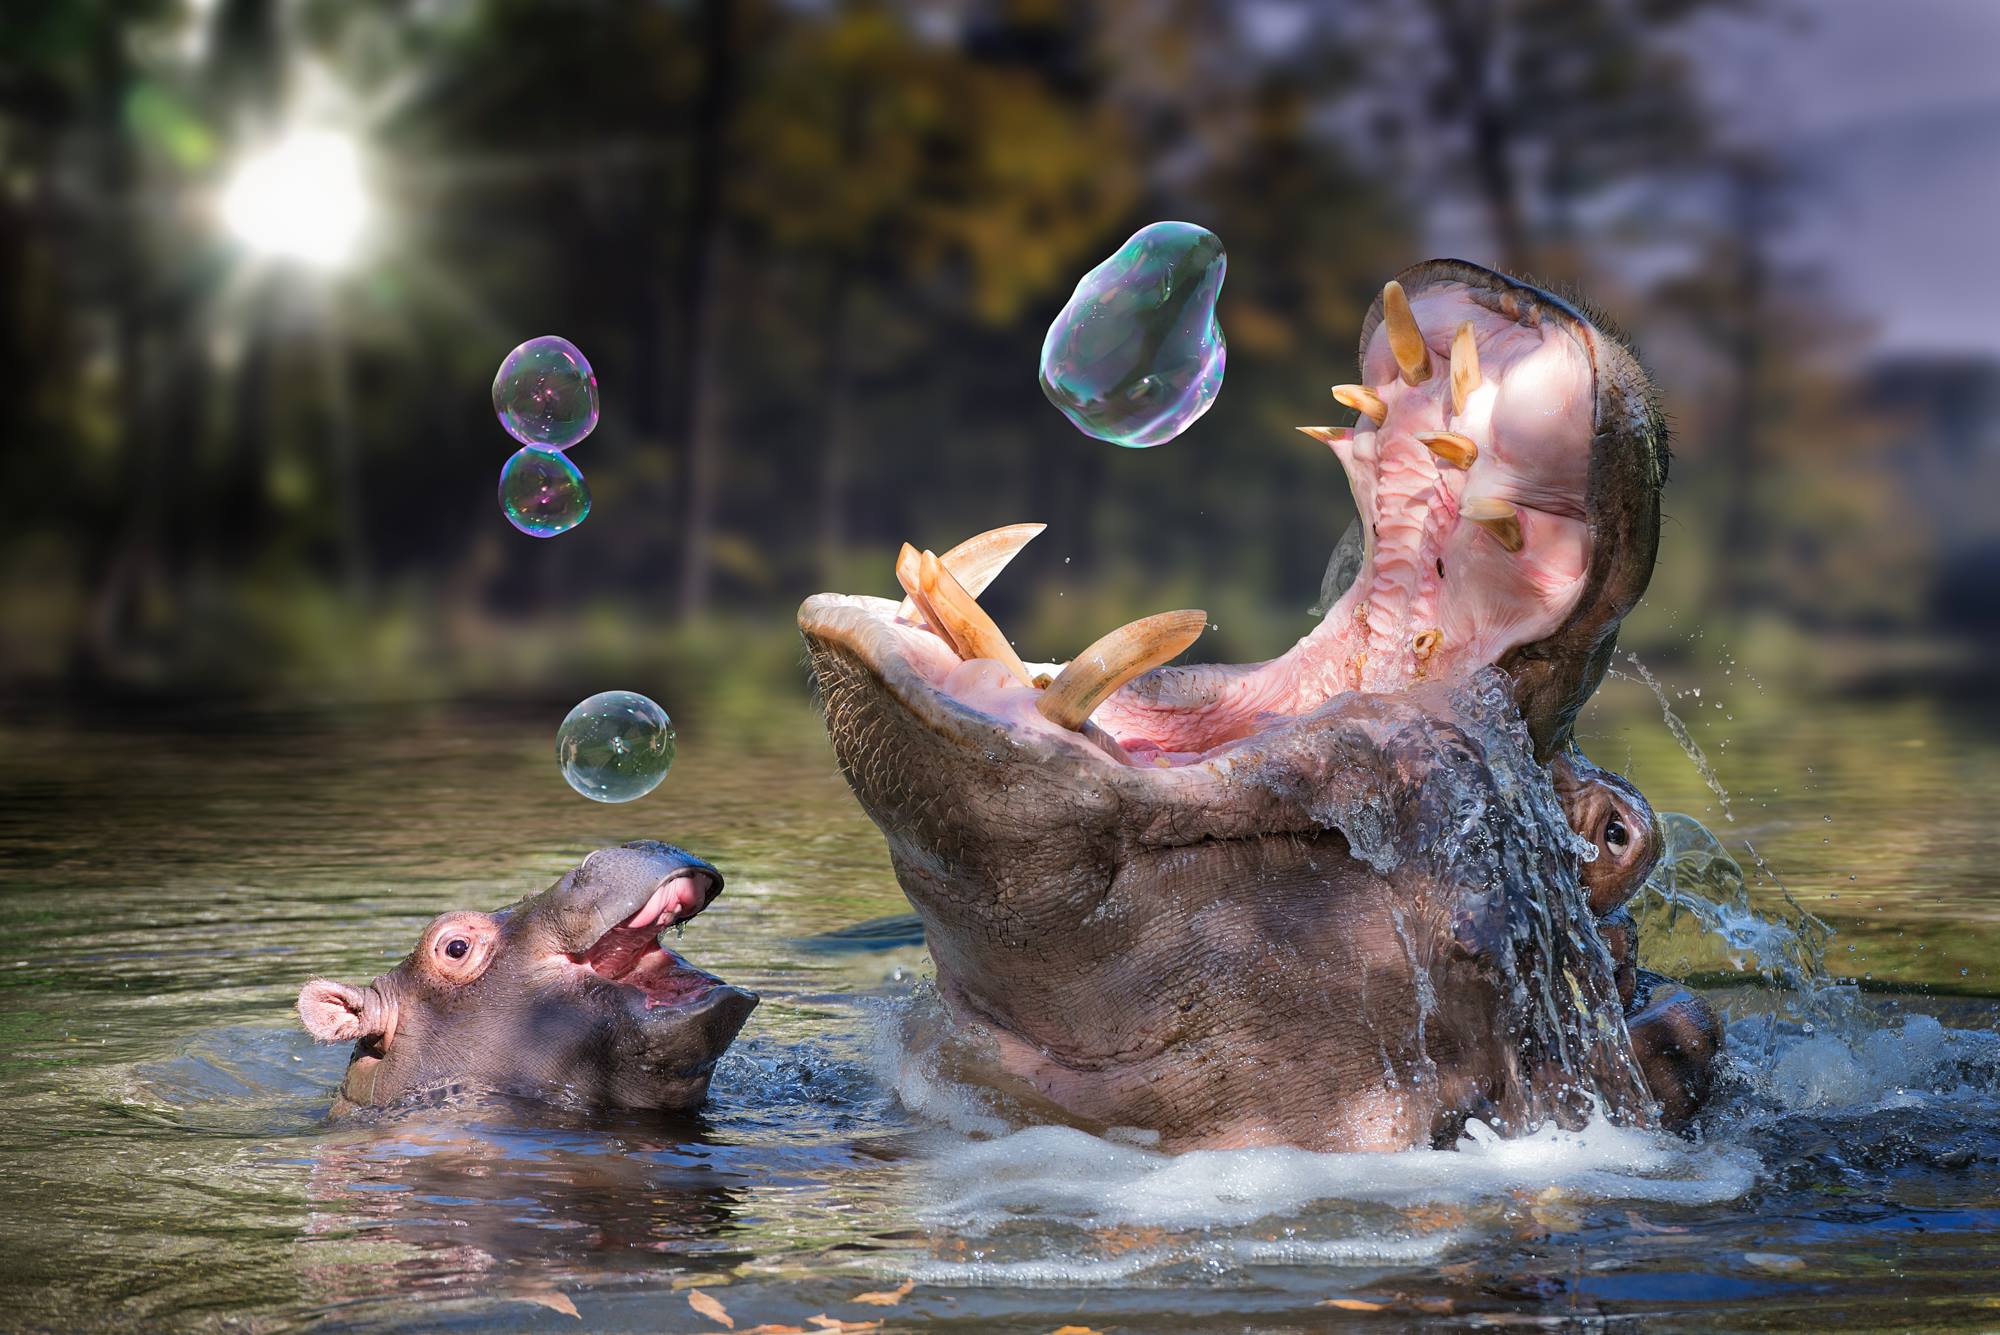 John Wilhelm is a photoholic -Playing around after a great meal / retouches photos